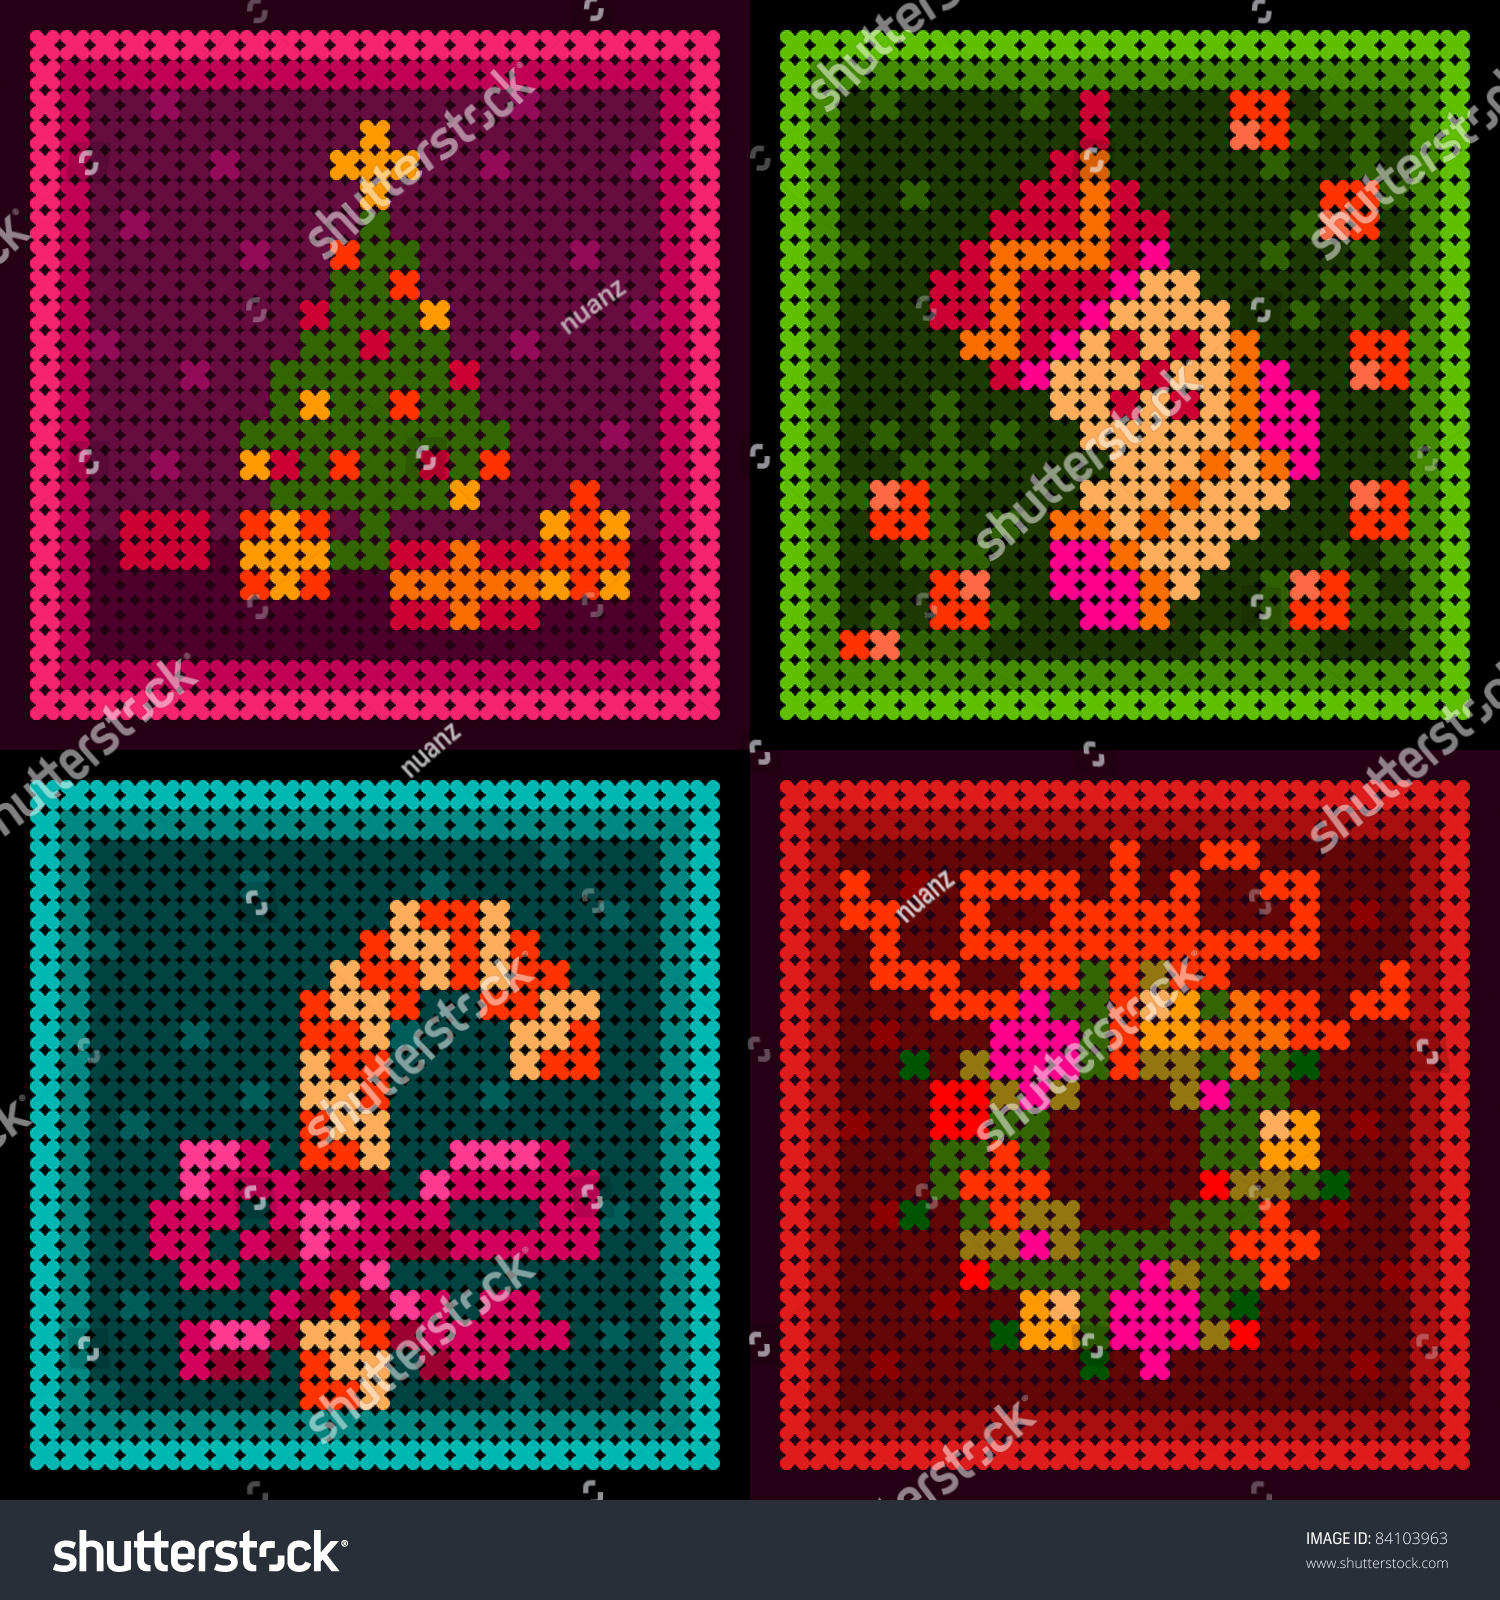 Christmas Cross Stitch Ornaments Stock Vector (Royalty Free) 84103963 ...